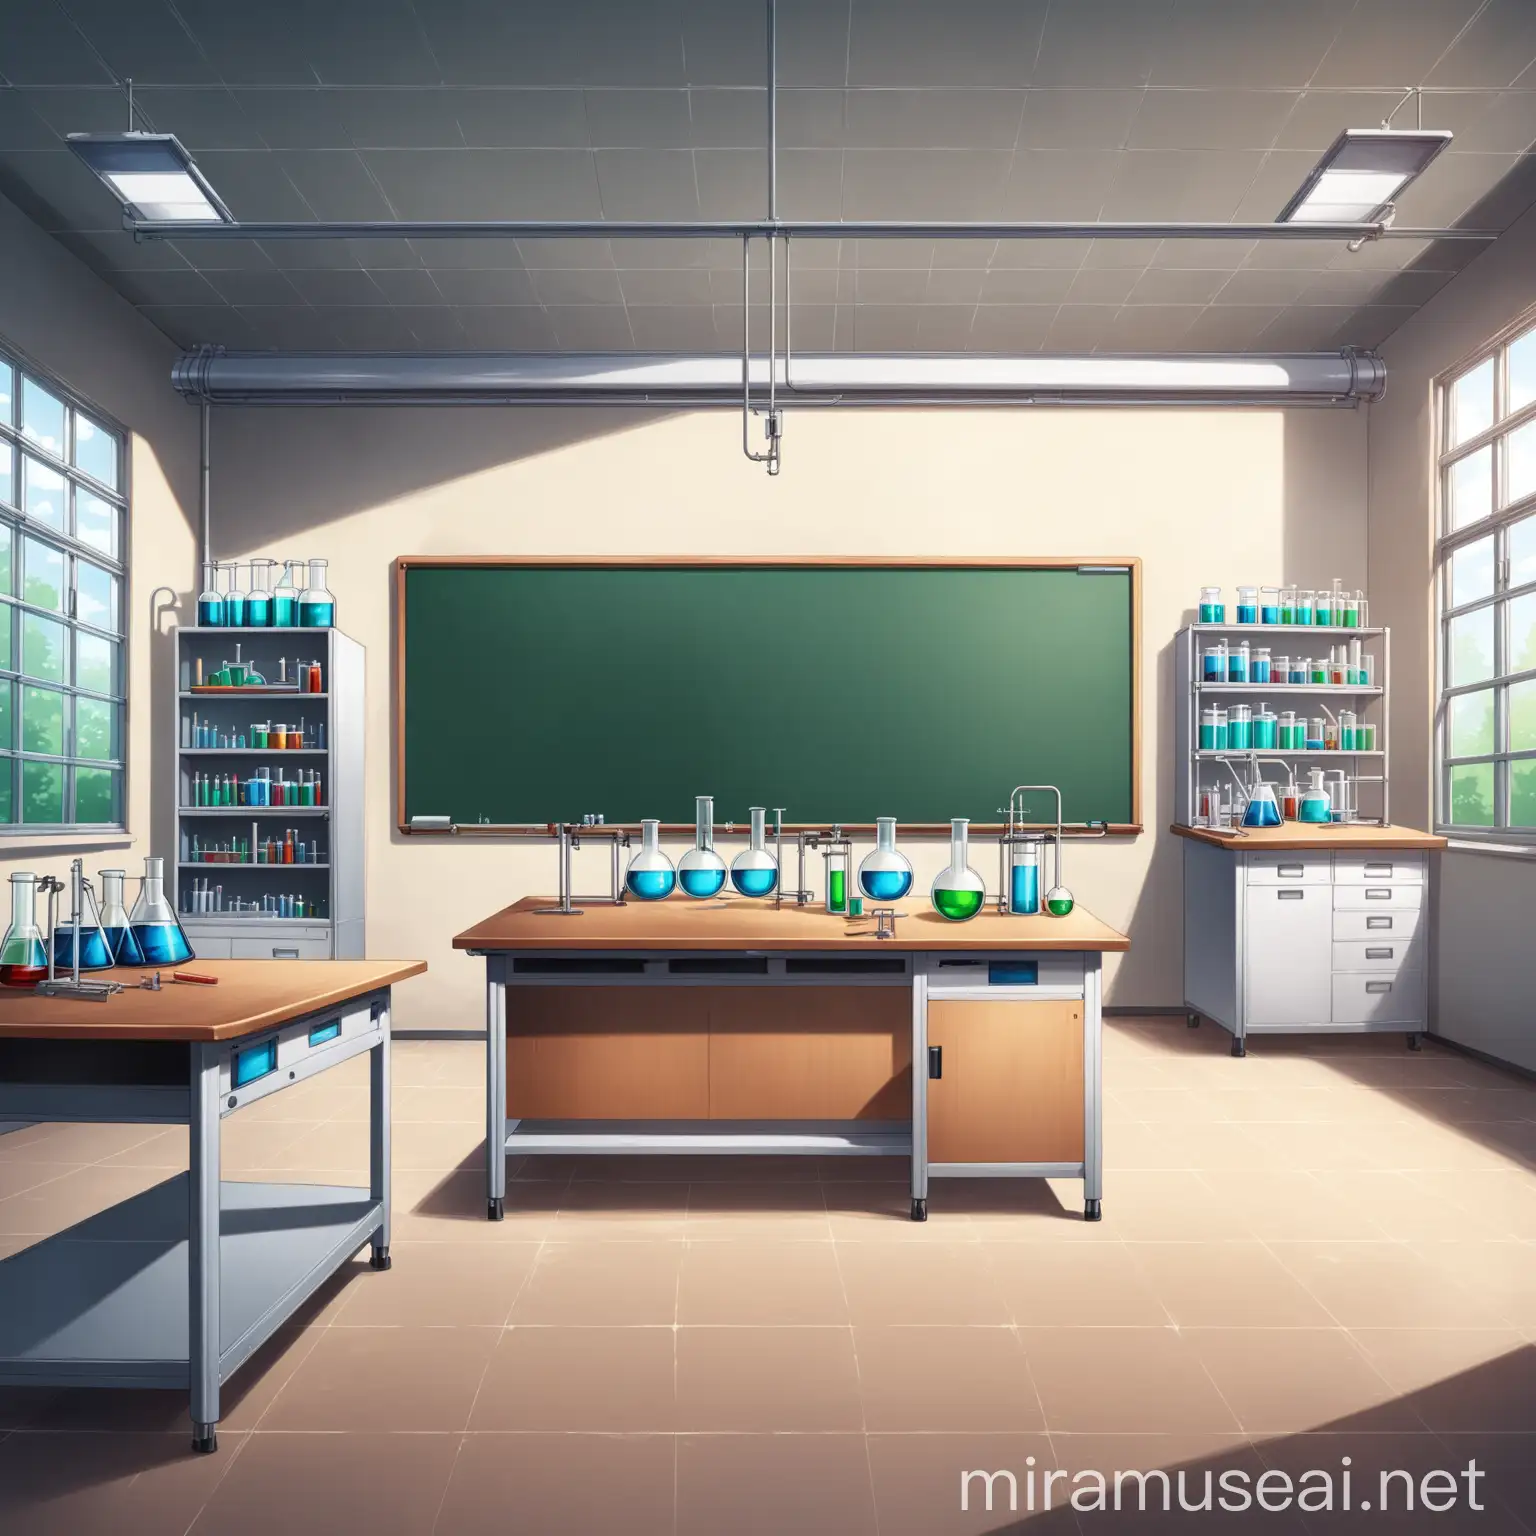 Empty Laboratory with Chalkboard Scientific Workspace Without Individuals